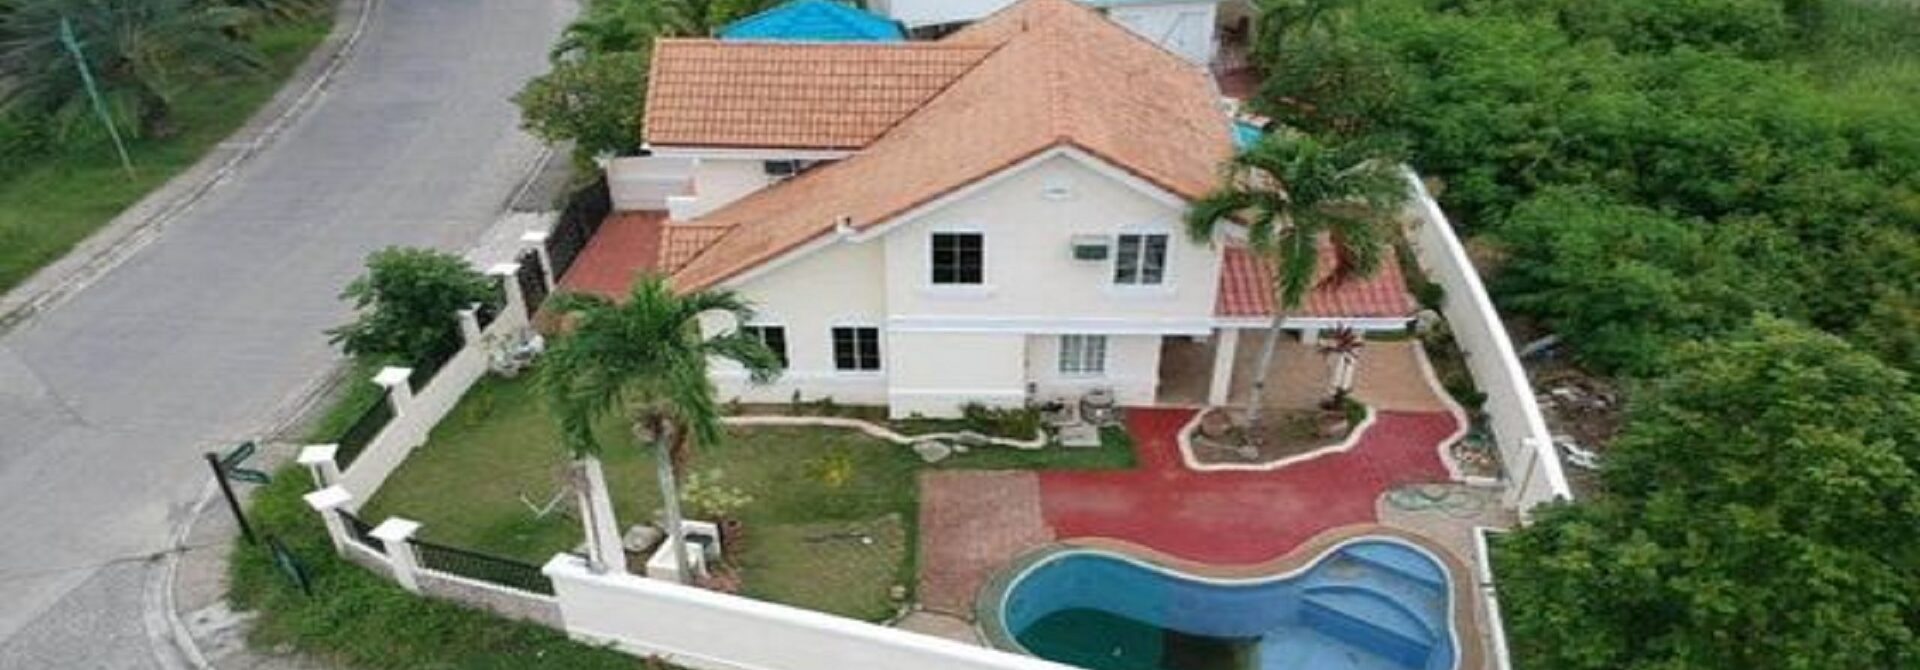 Corona Del Mar Talisay House and Lot for Sale with Swimming Pool!!!